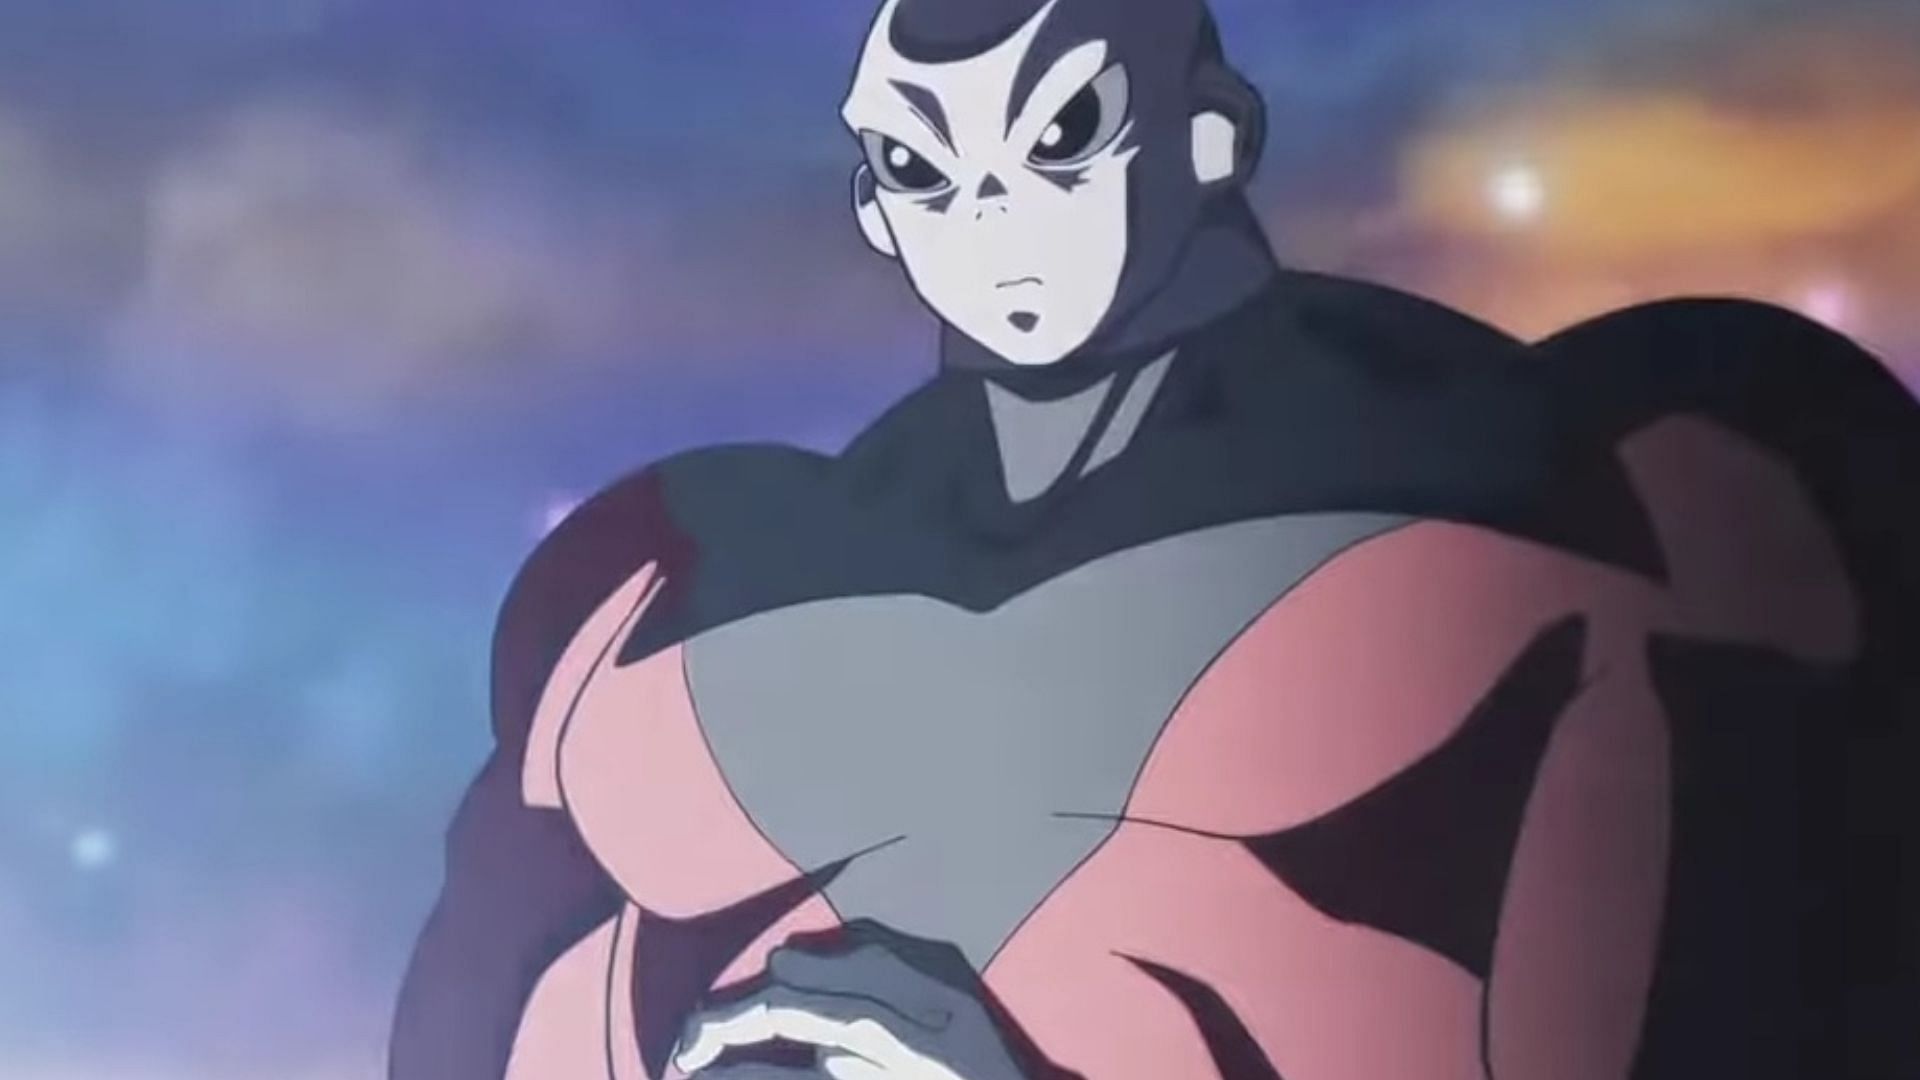 Jiren as seen in the anime (Image courtesy: Toei Animationtion)